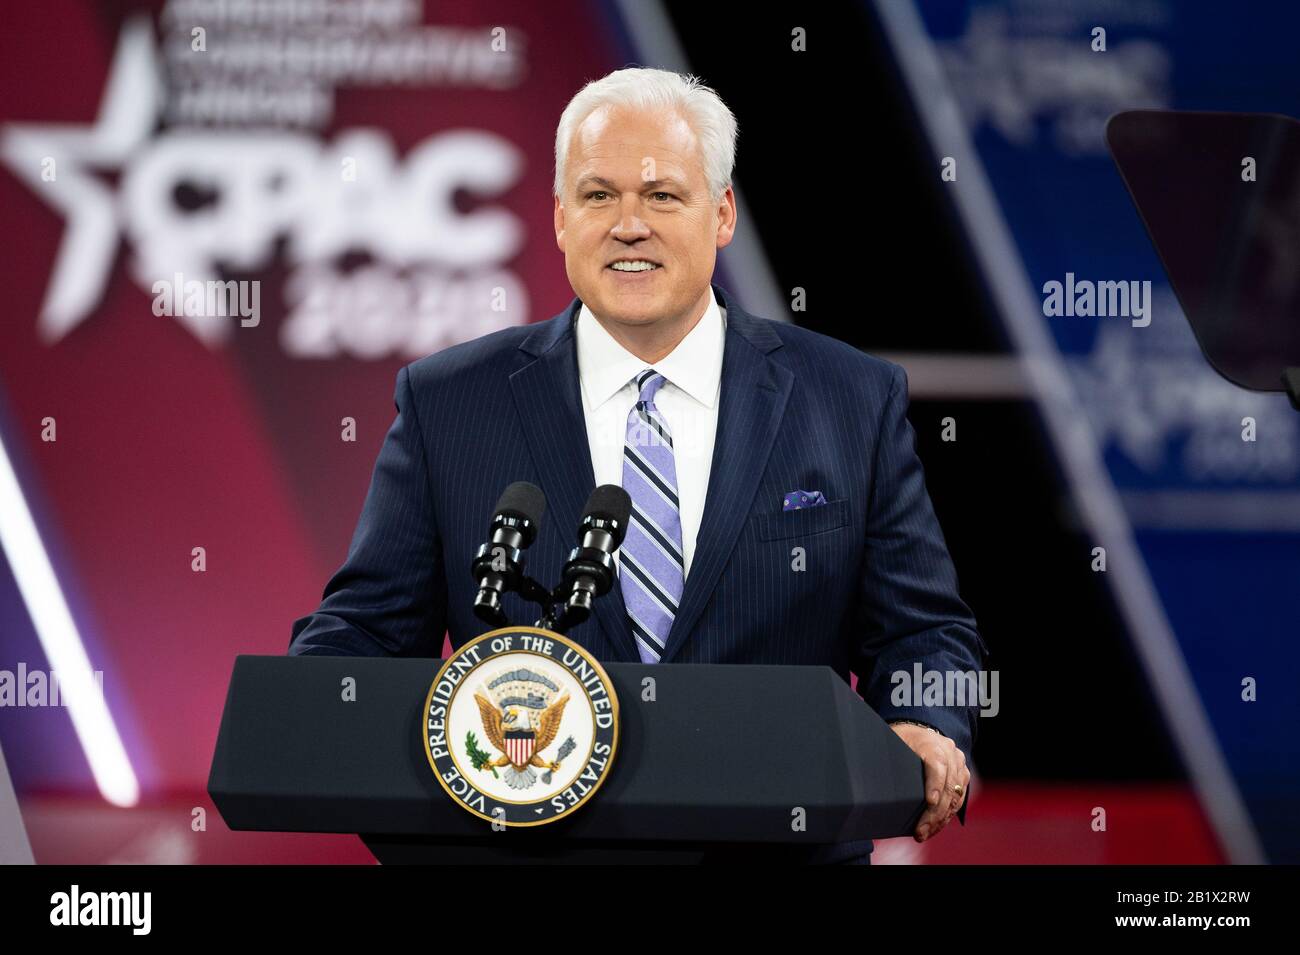 Matt Schlapp, Chairman, American Conservative Union speaks during the Conservative Political Action Conference (CPAC) in Oxon Hill. Stock Photo